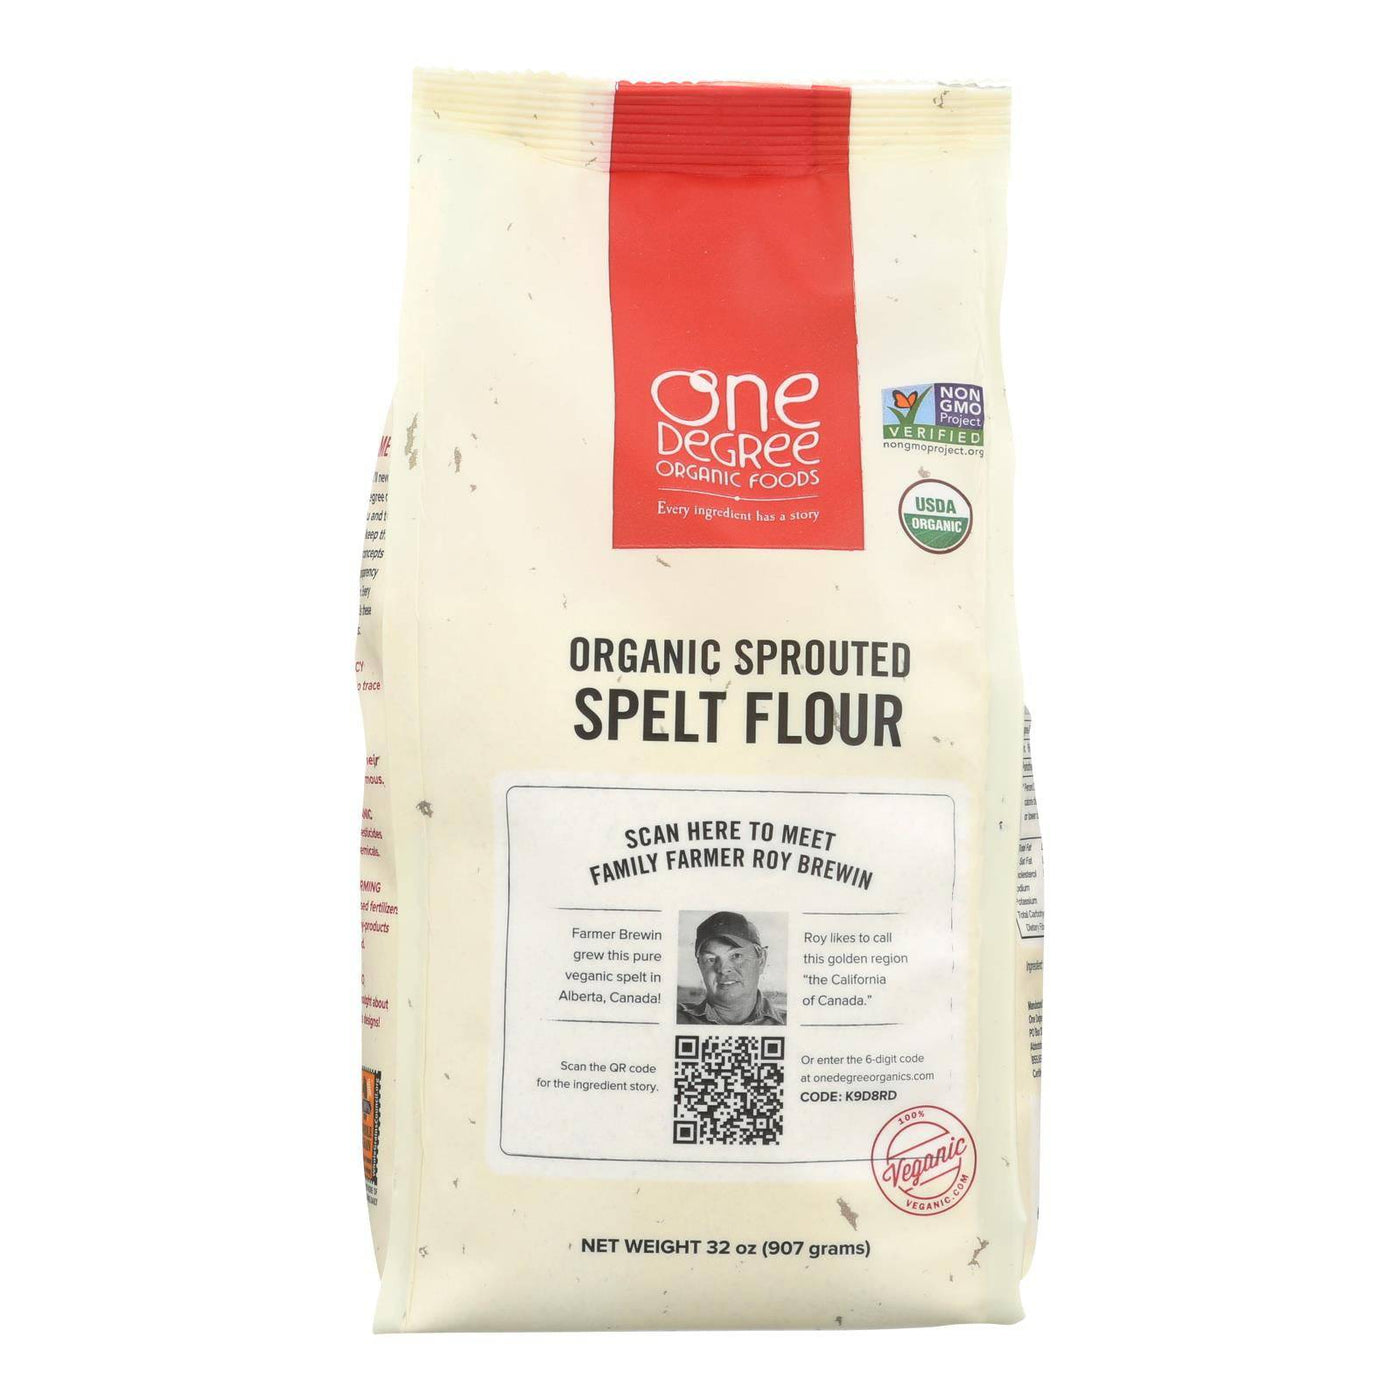 One Degree Organic Foods Sprouted Spelt Flour - Organic - Case Of 6 - 32 Oz. | OnlyNaturals.us